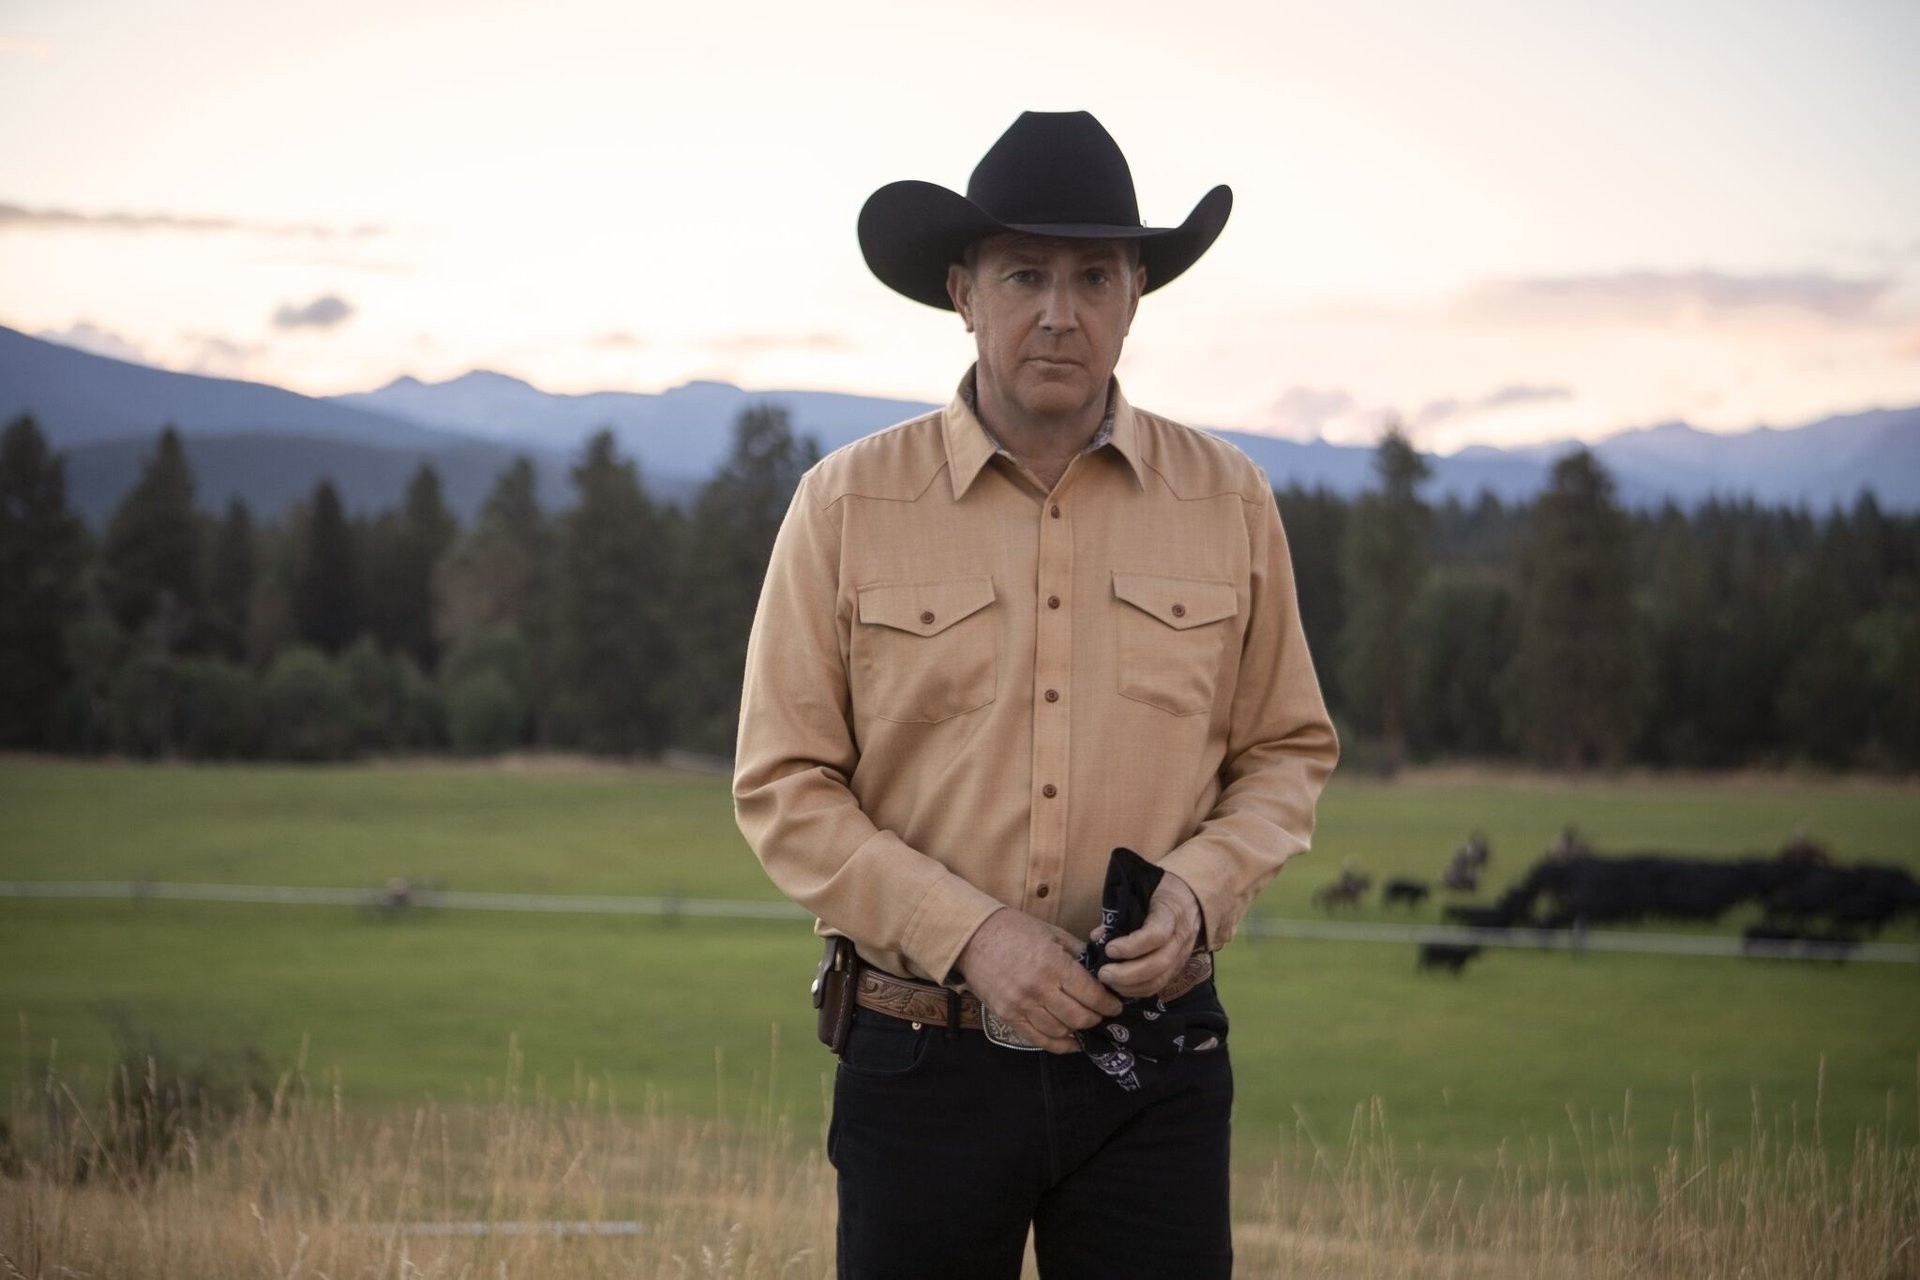 Kevin Costner Pay Per Episode Of Yellowstone